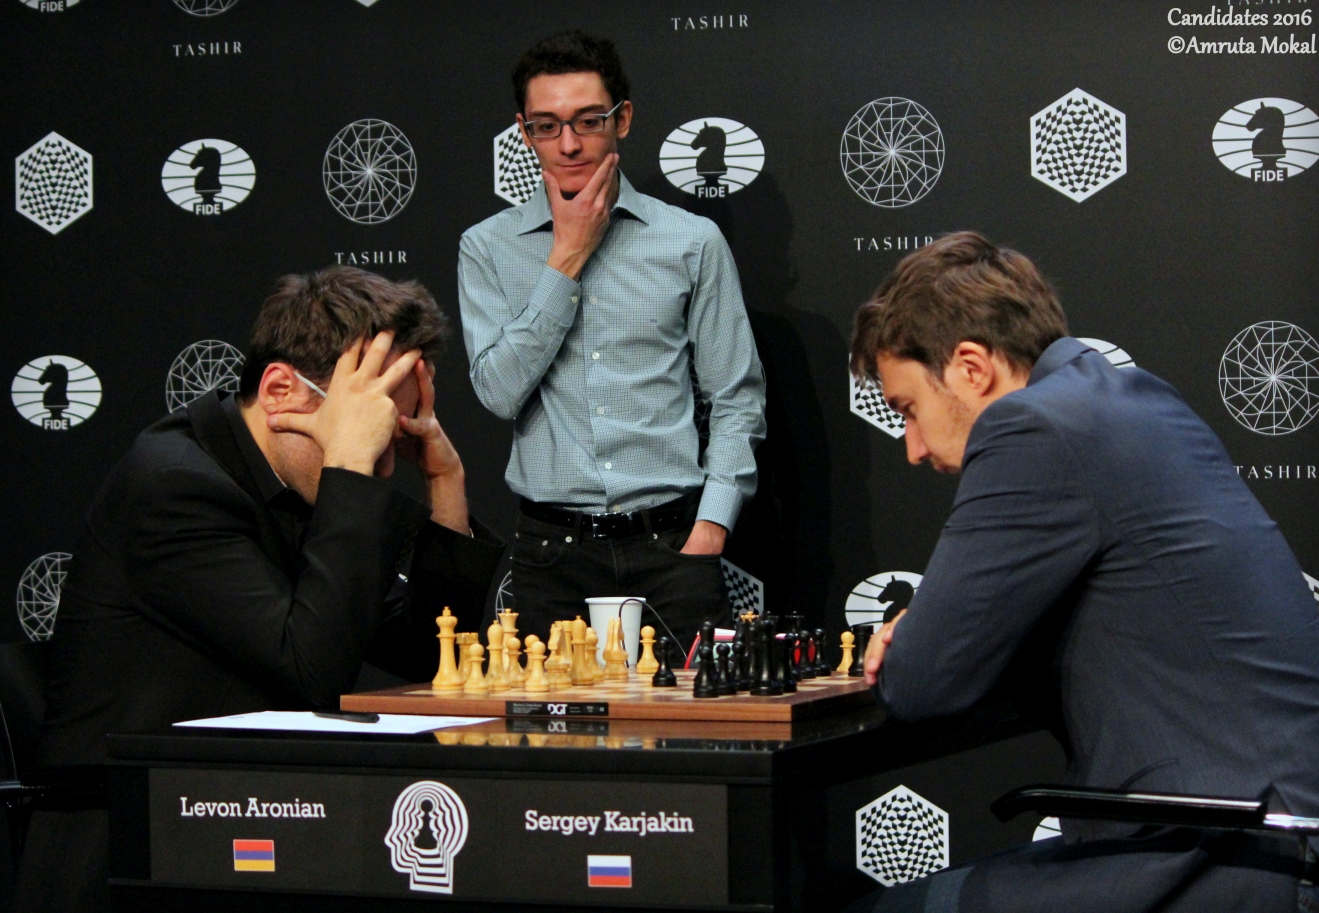 Why are top rated players like Karjakin and Aronian not in the